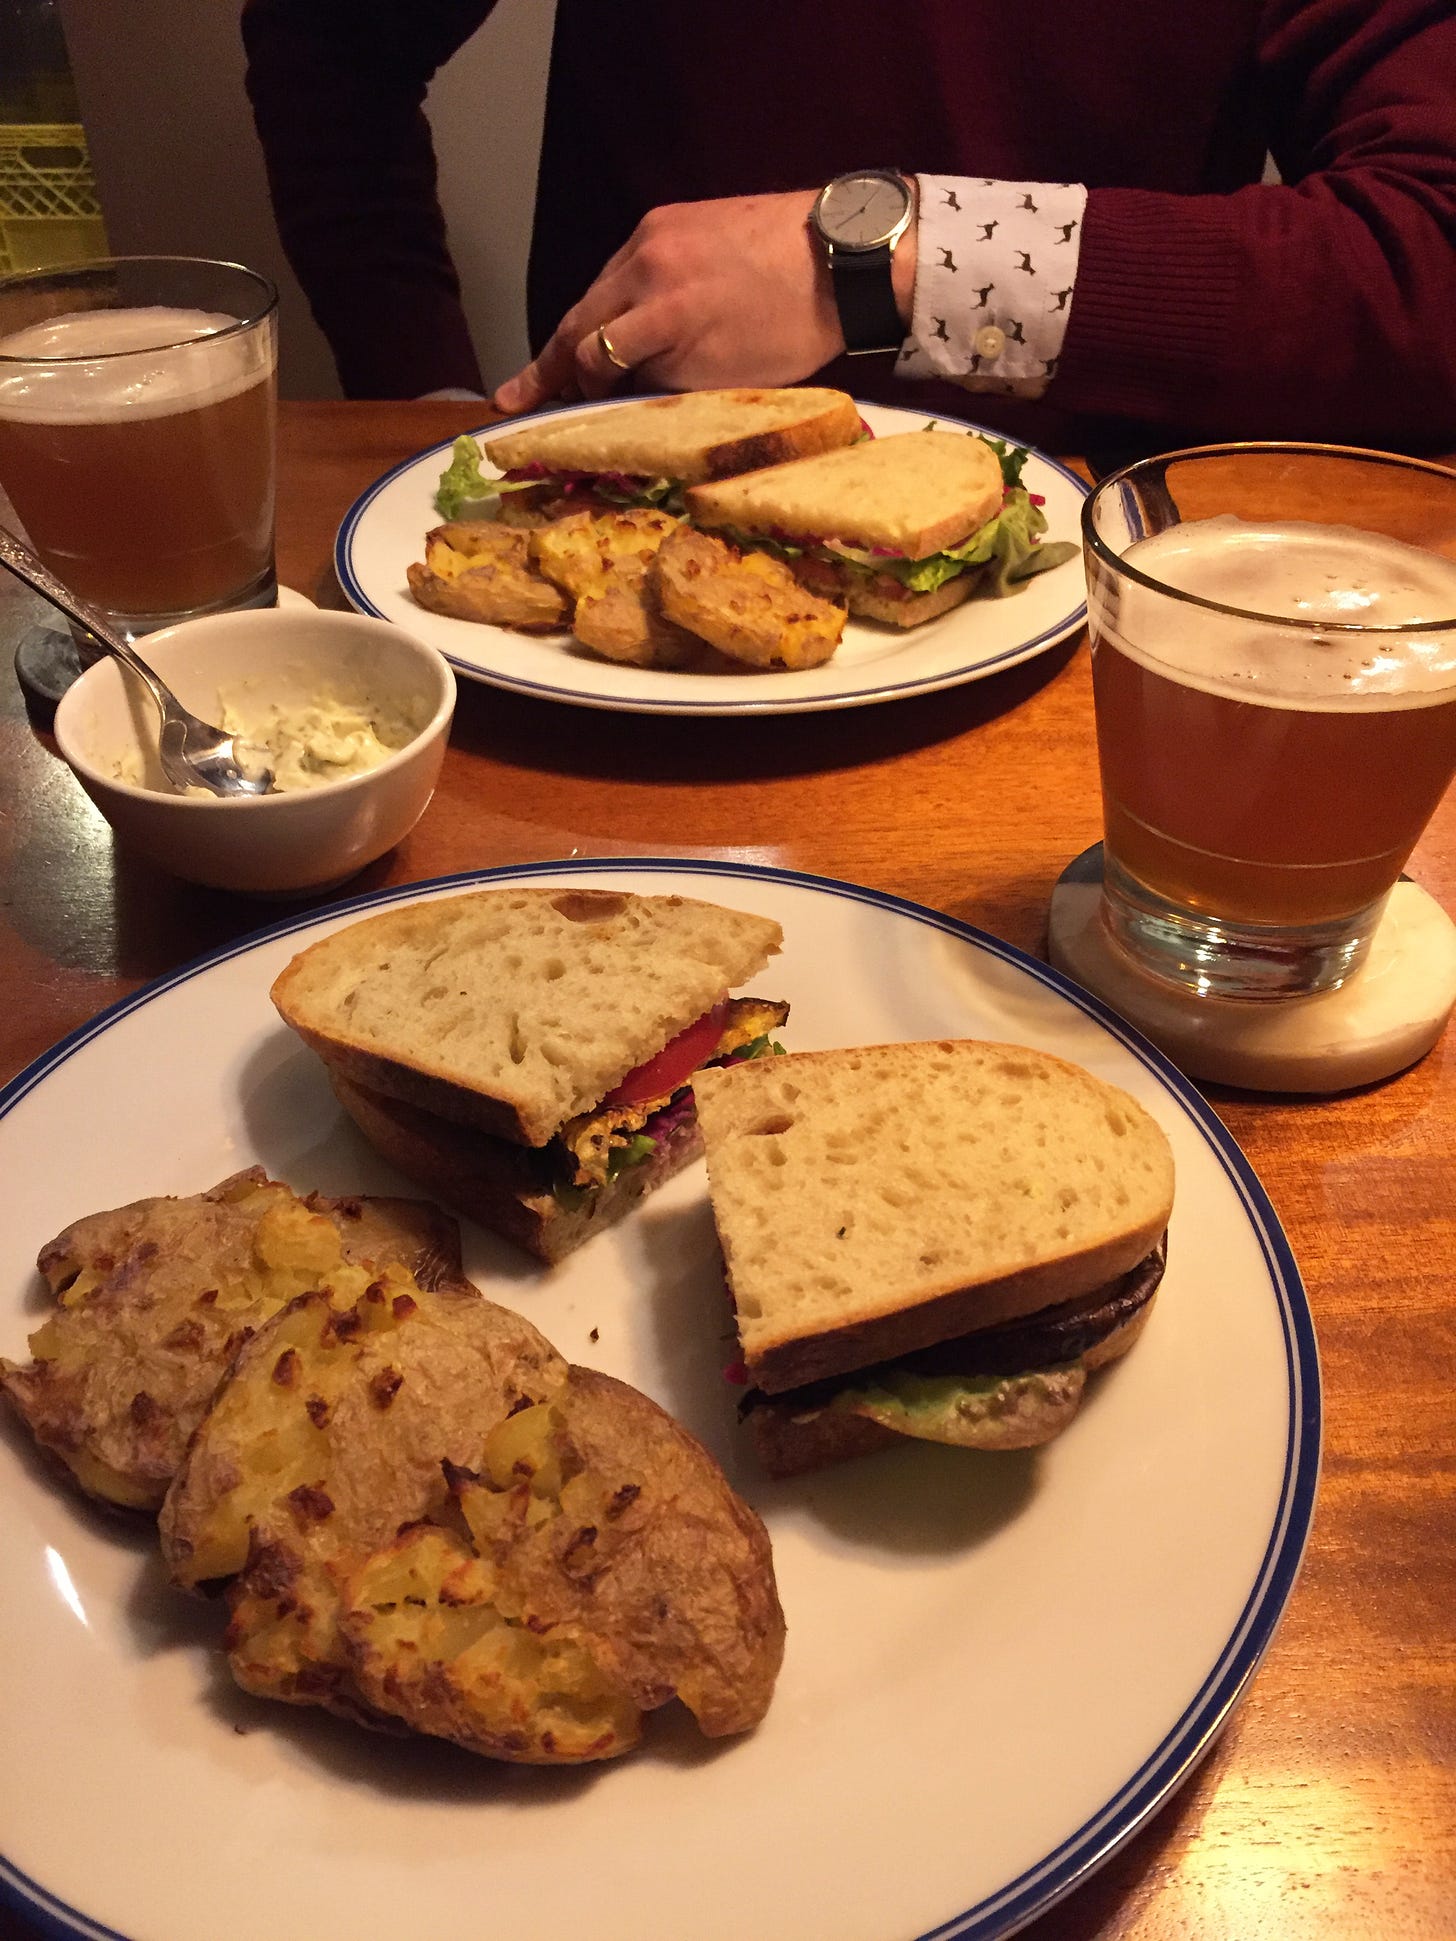 Two large plates with sandwiches cut in half and three smashed potatoes arranged next to them. Between the plates is a small dish of basil mayo, and two glasses of beer on coasters sit to the sides of the plates.